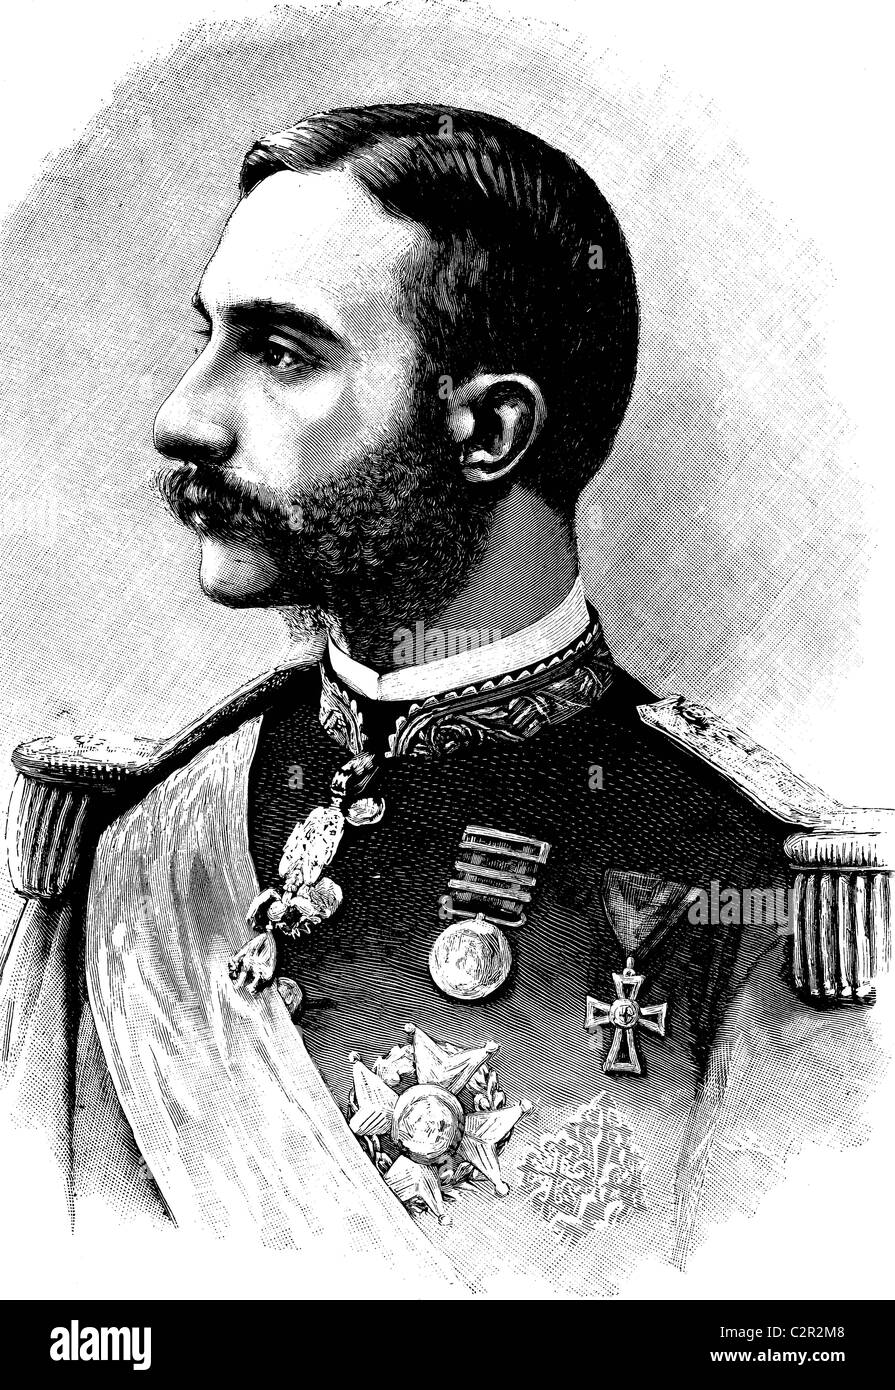 Alfonso XII (1857-1885), King of Spain, historical illustration, circa 1886 Stock Photo